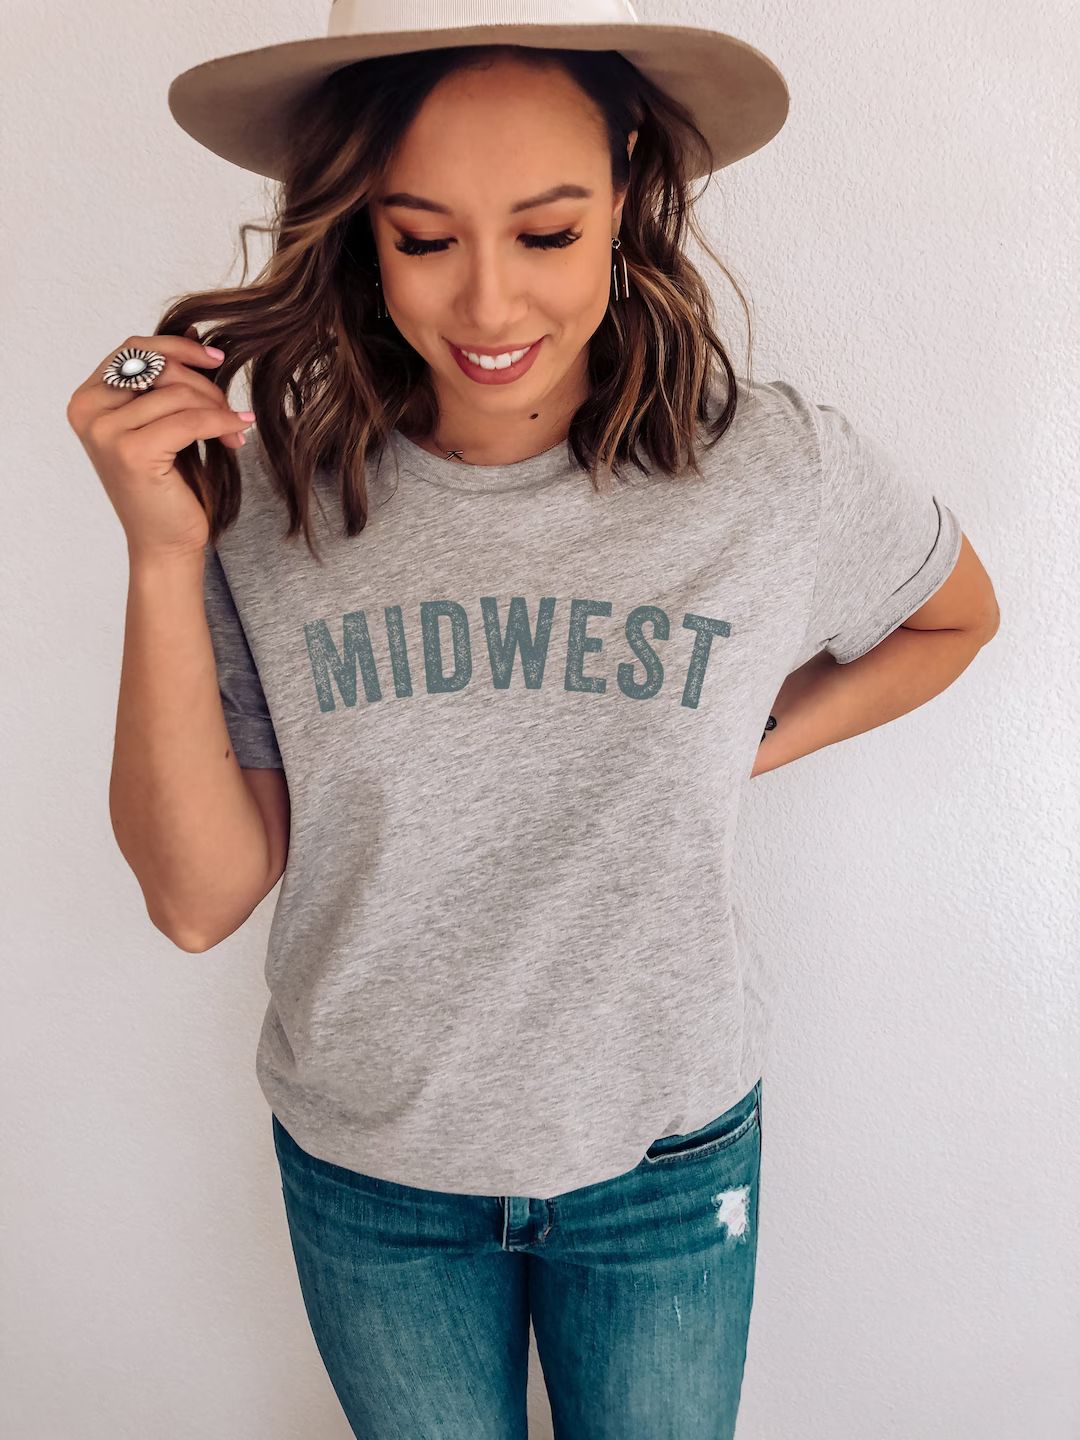 Midwest Tee, Midwest Shirt, Women's Midwest Graphic Print Over, Crewneck, Home State Shirt, Unise... | Etsy (US)